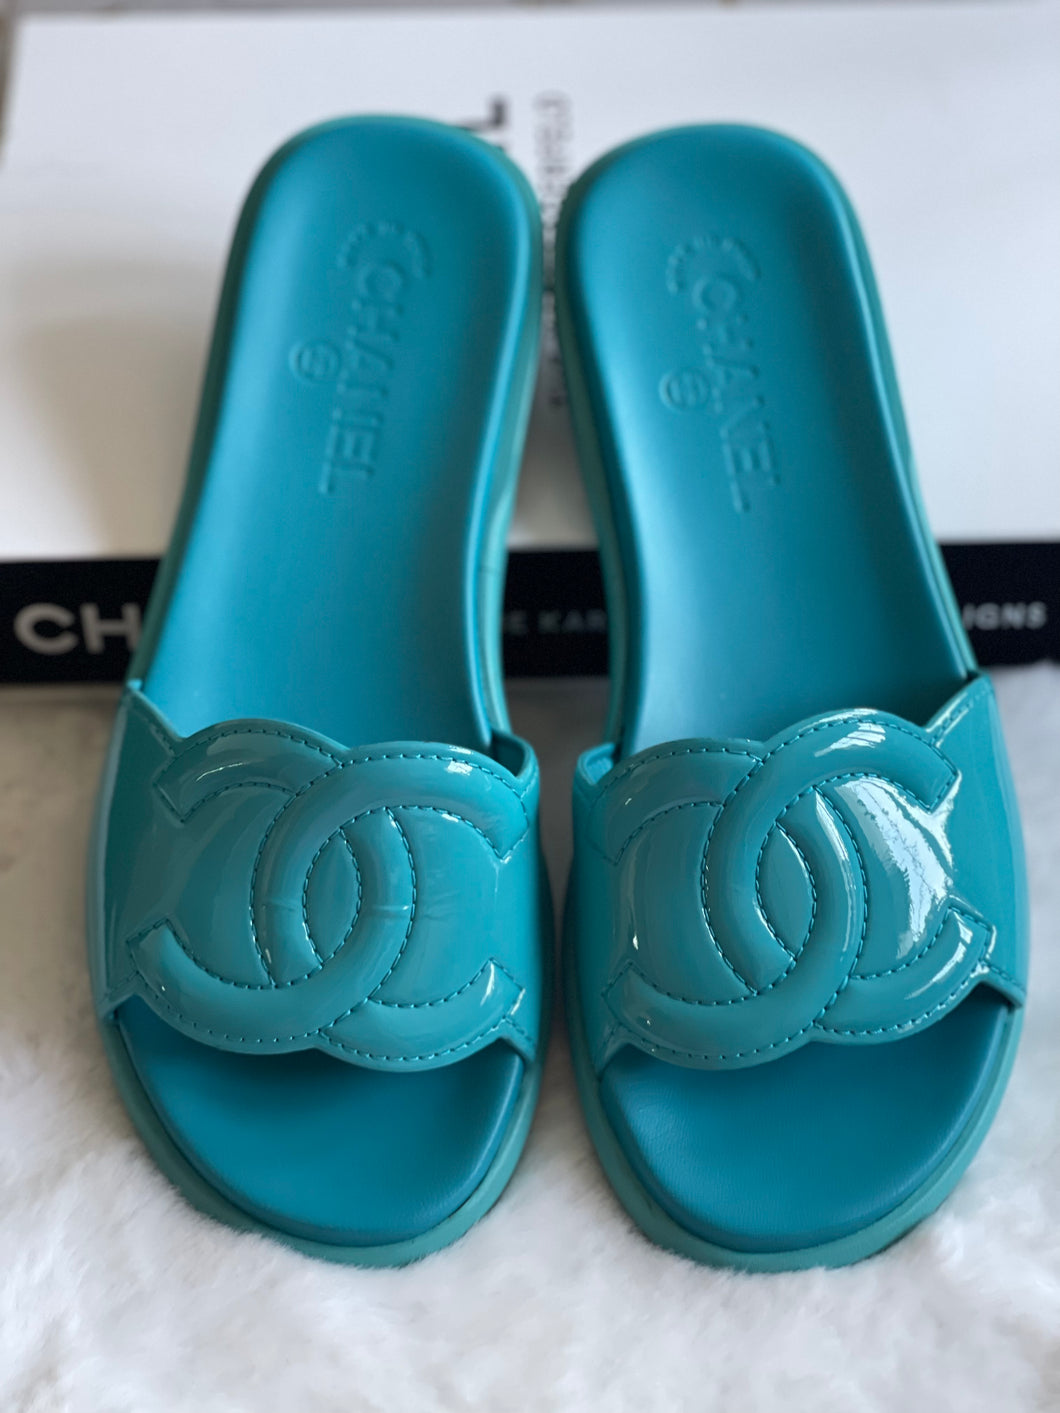 Chanel Turquoise Rubber Sliders Size 38C